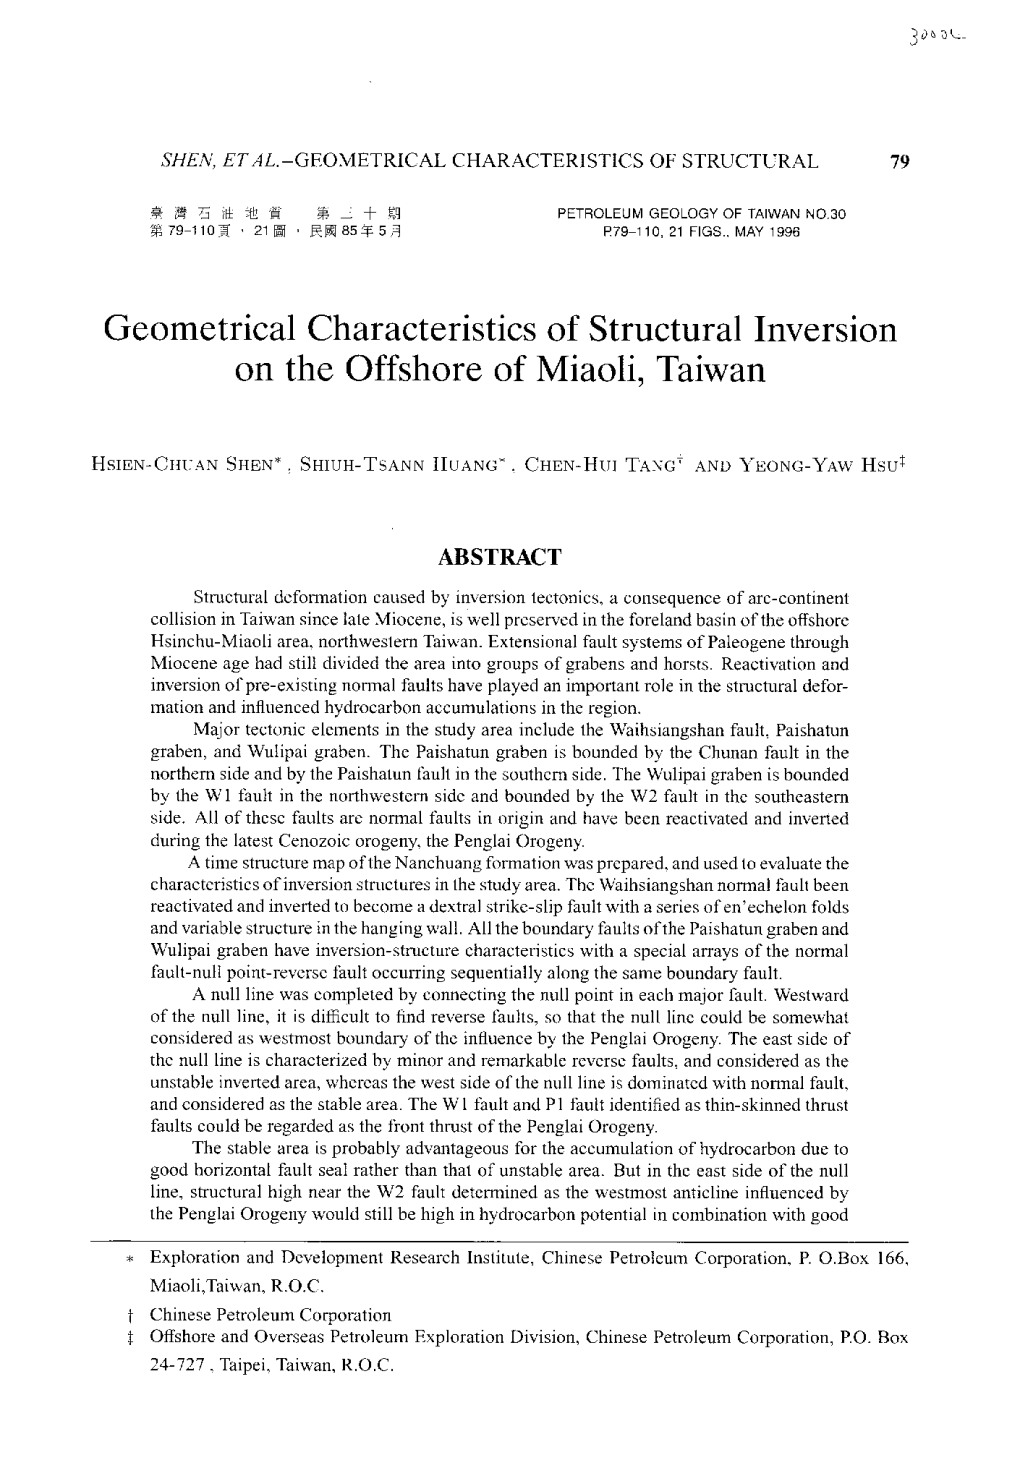 Geometrical Characteristics of Structural Inversion on the Offshore of Miaoli, Taiwan